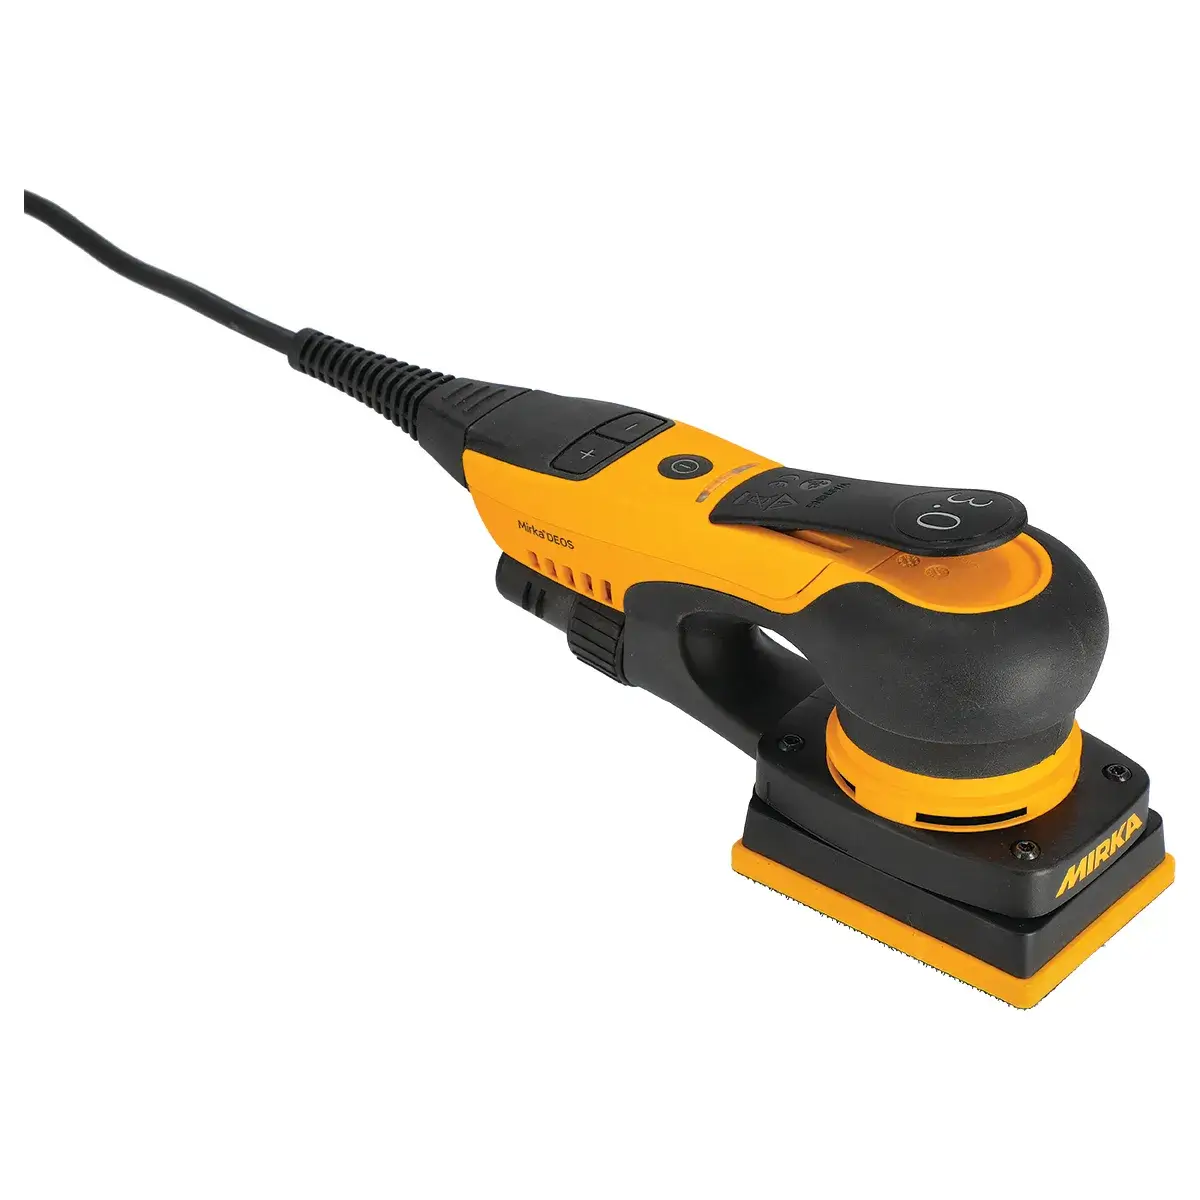 A black and yellow sander is on the floor